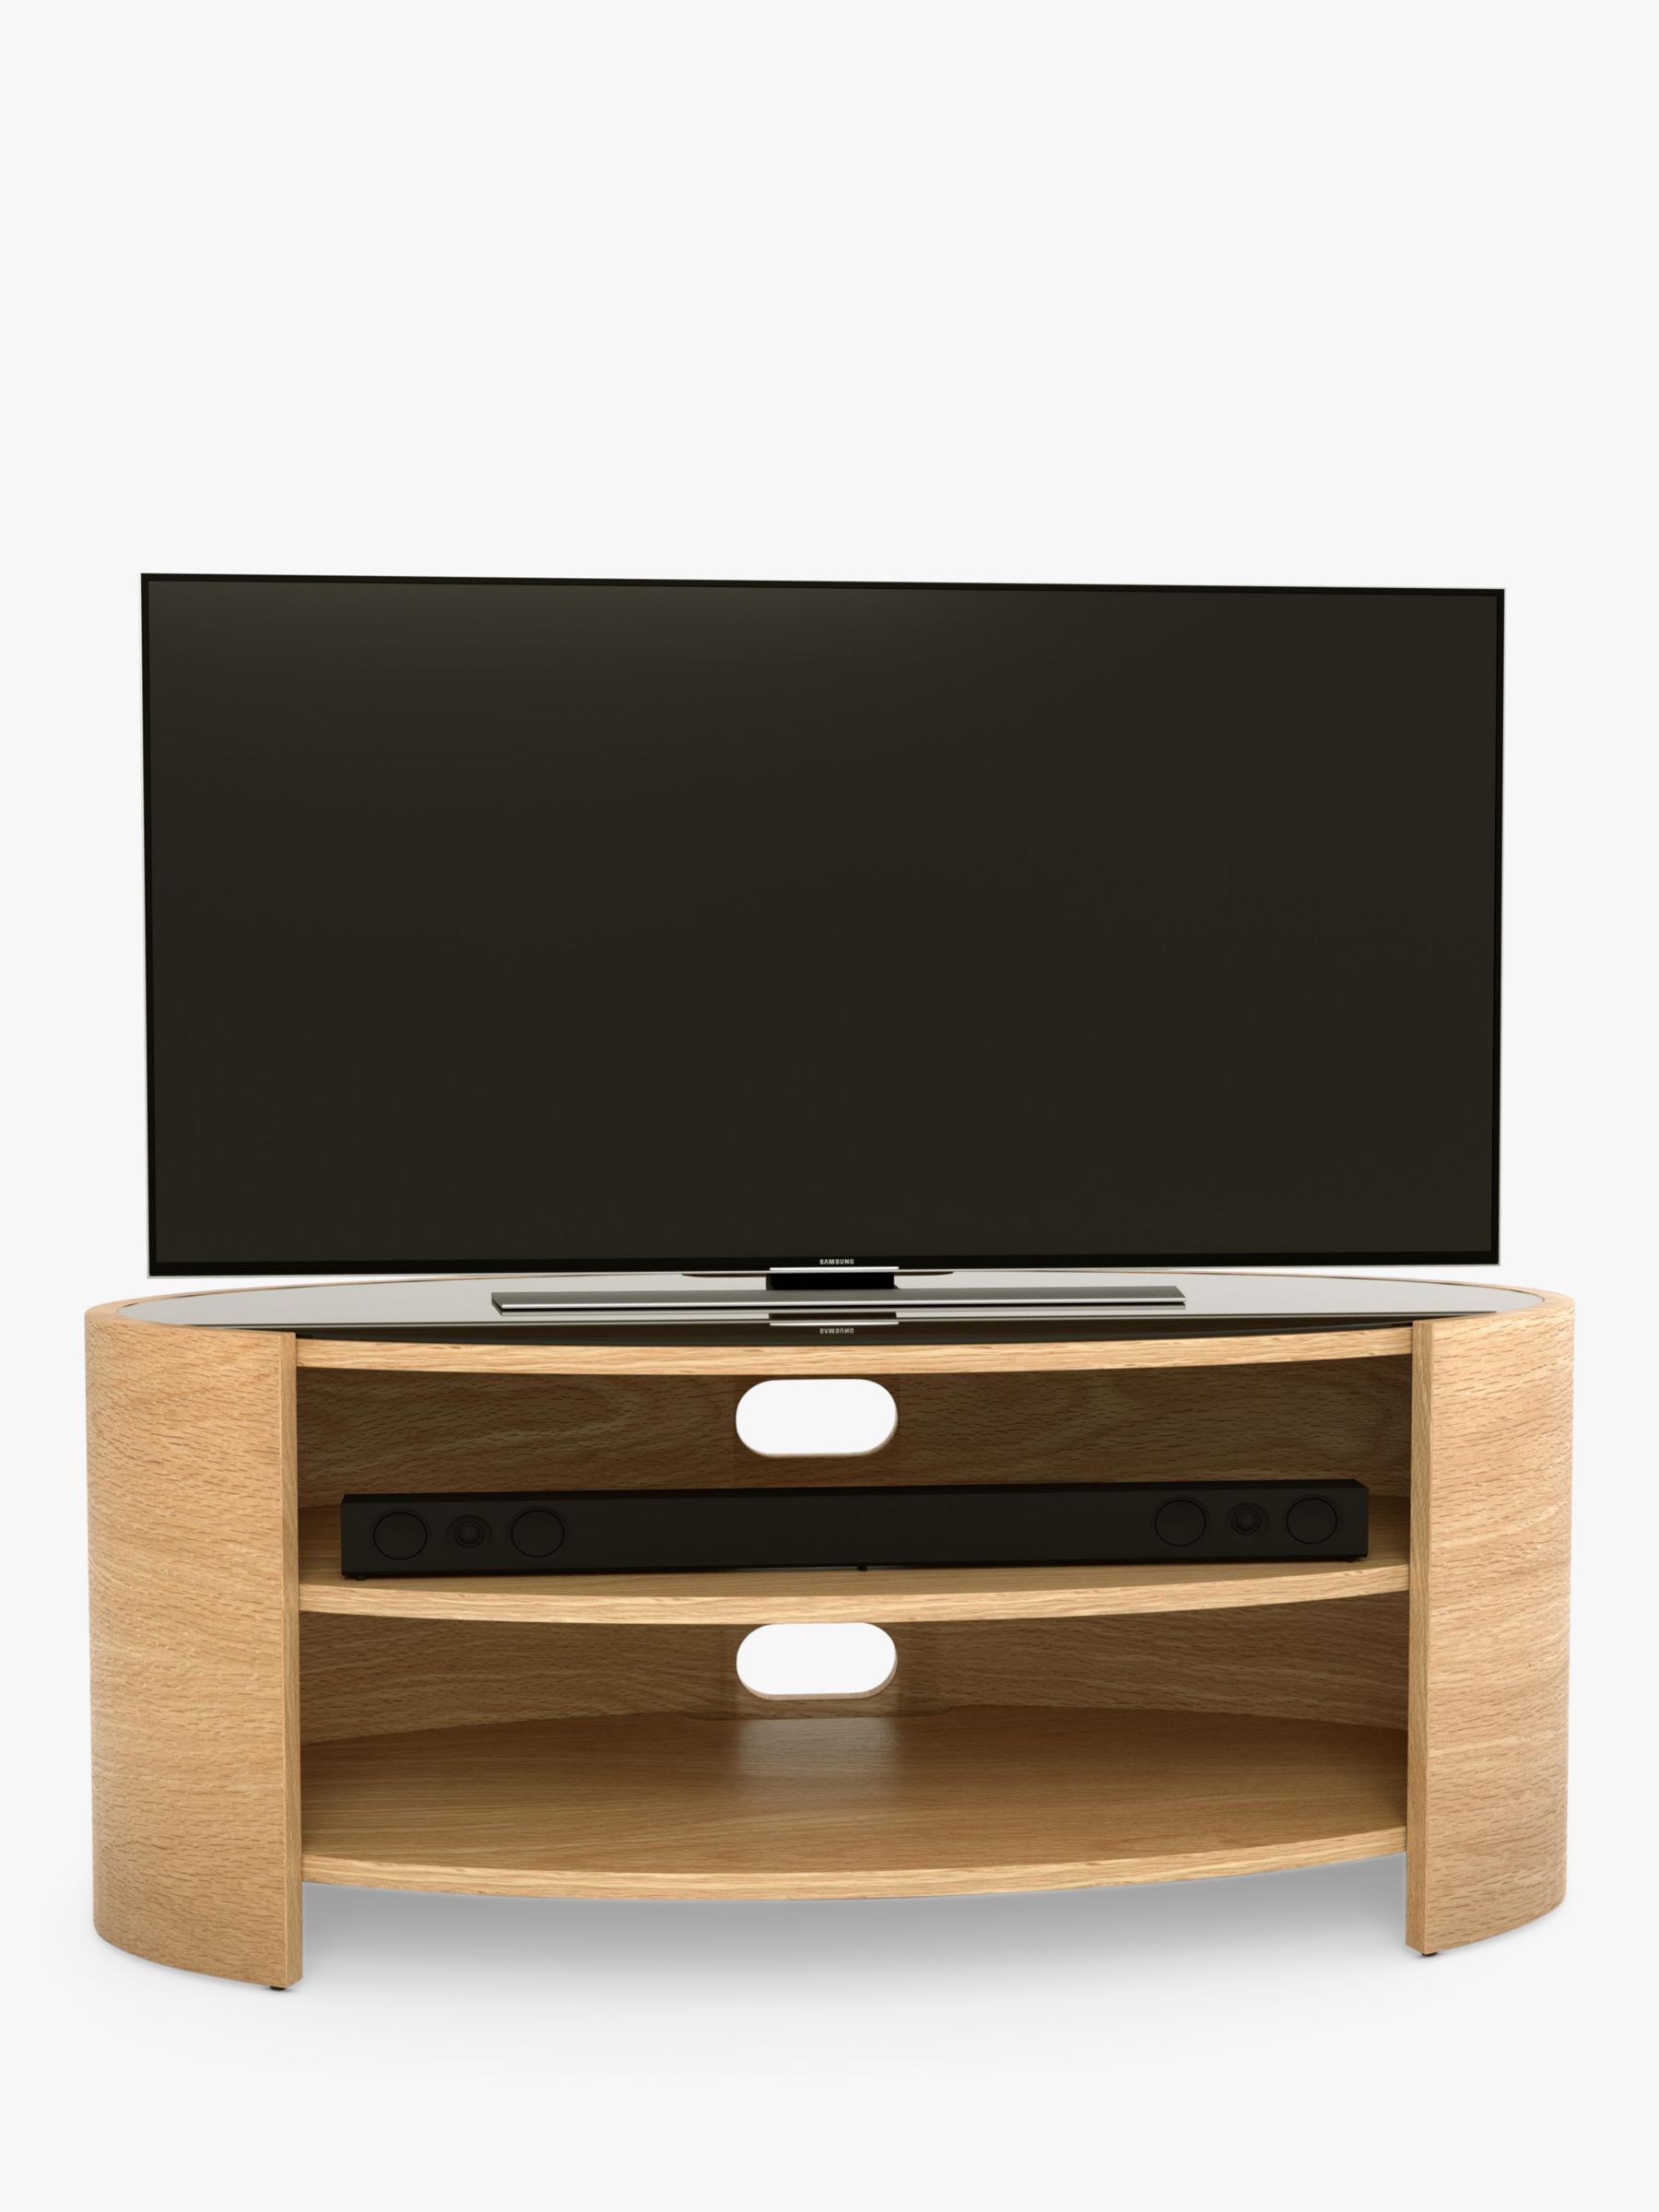 Tom Schneider Elliptic Deluxe 100 TV Stand for TVs up to 45"